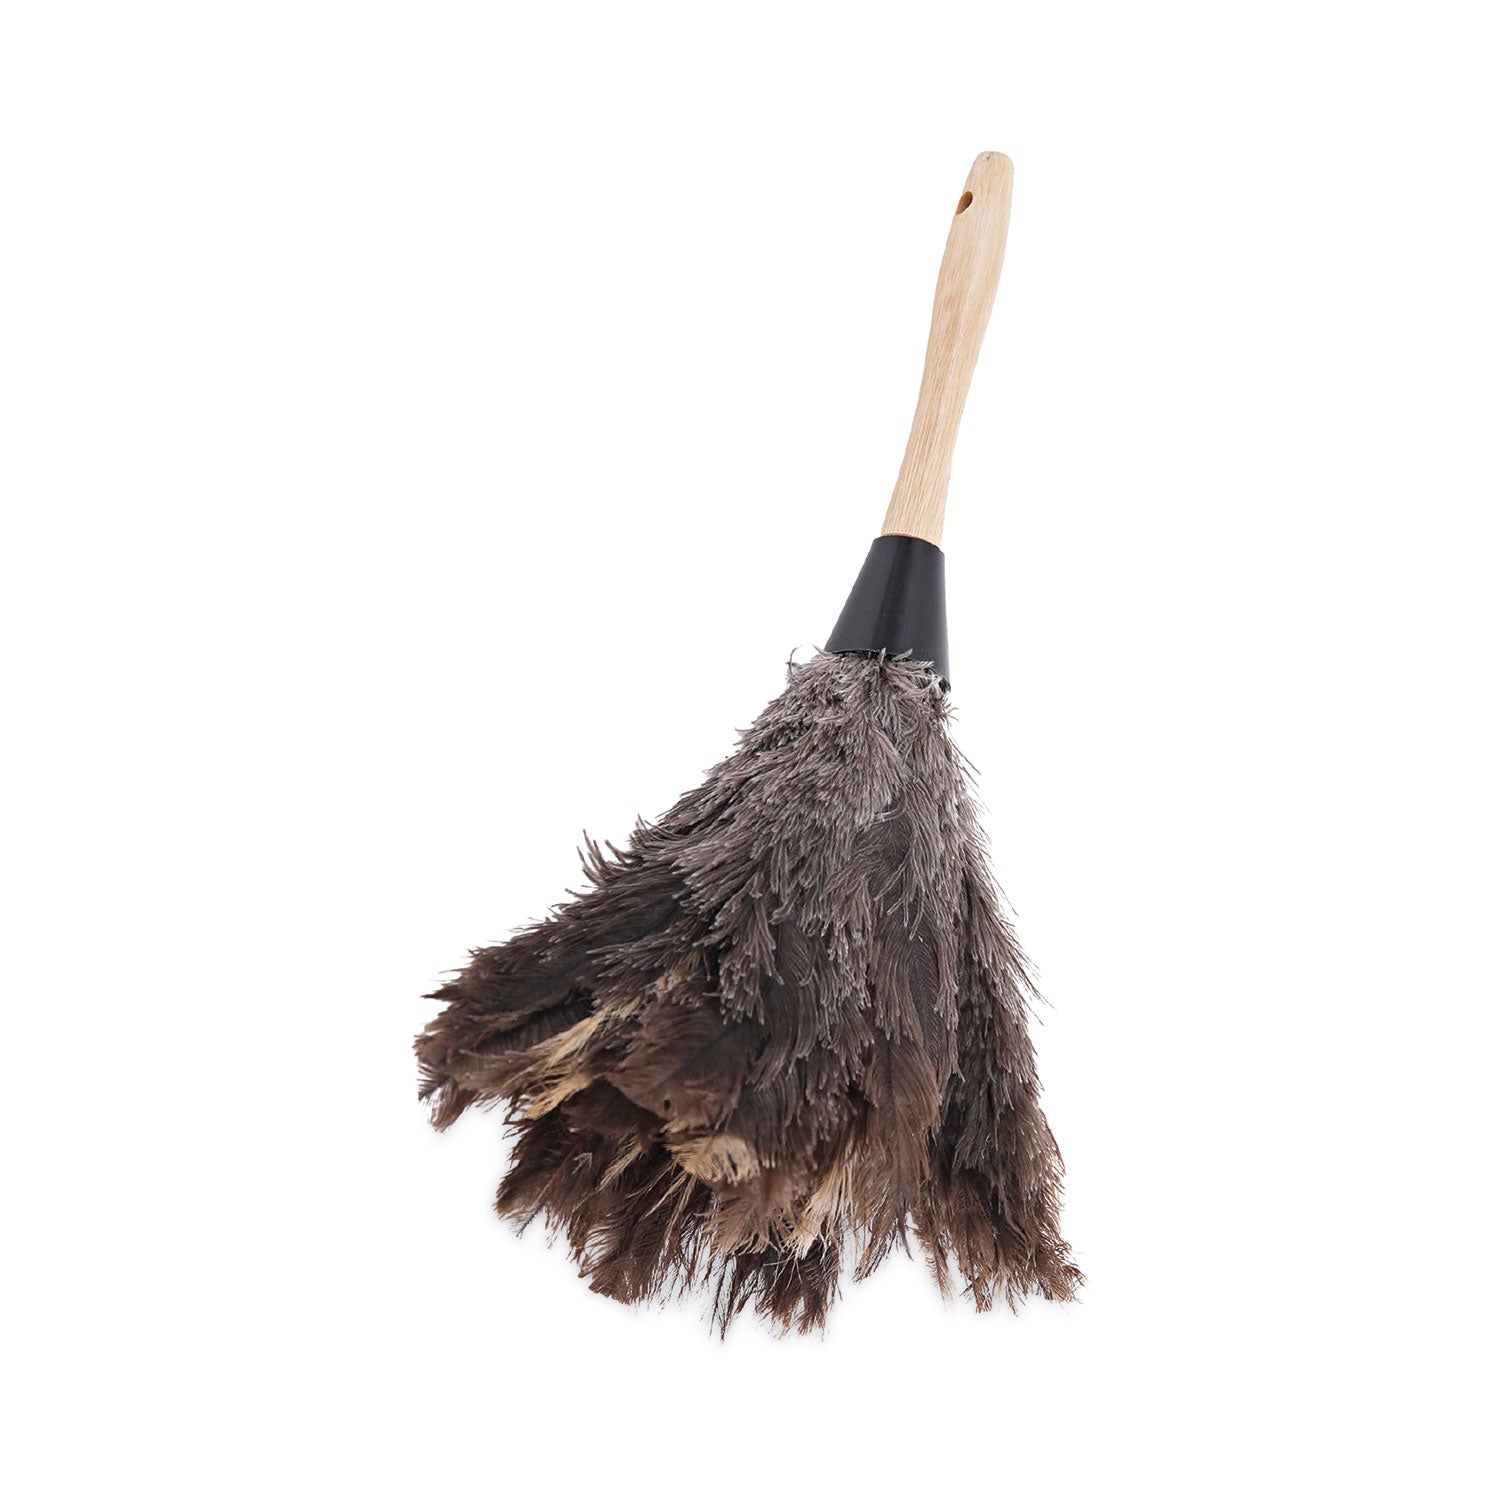 professional-ostrich-feather-duster-gray-14-length-6-handle_bwk14fd - 1